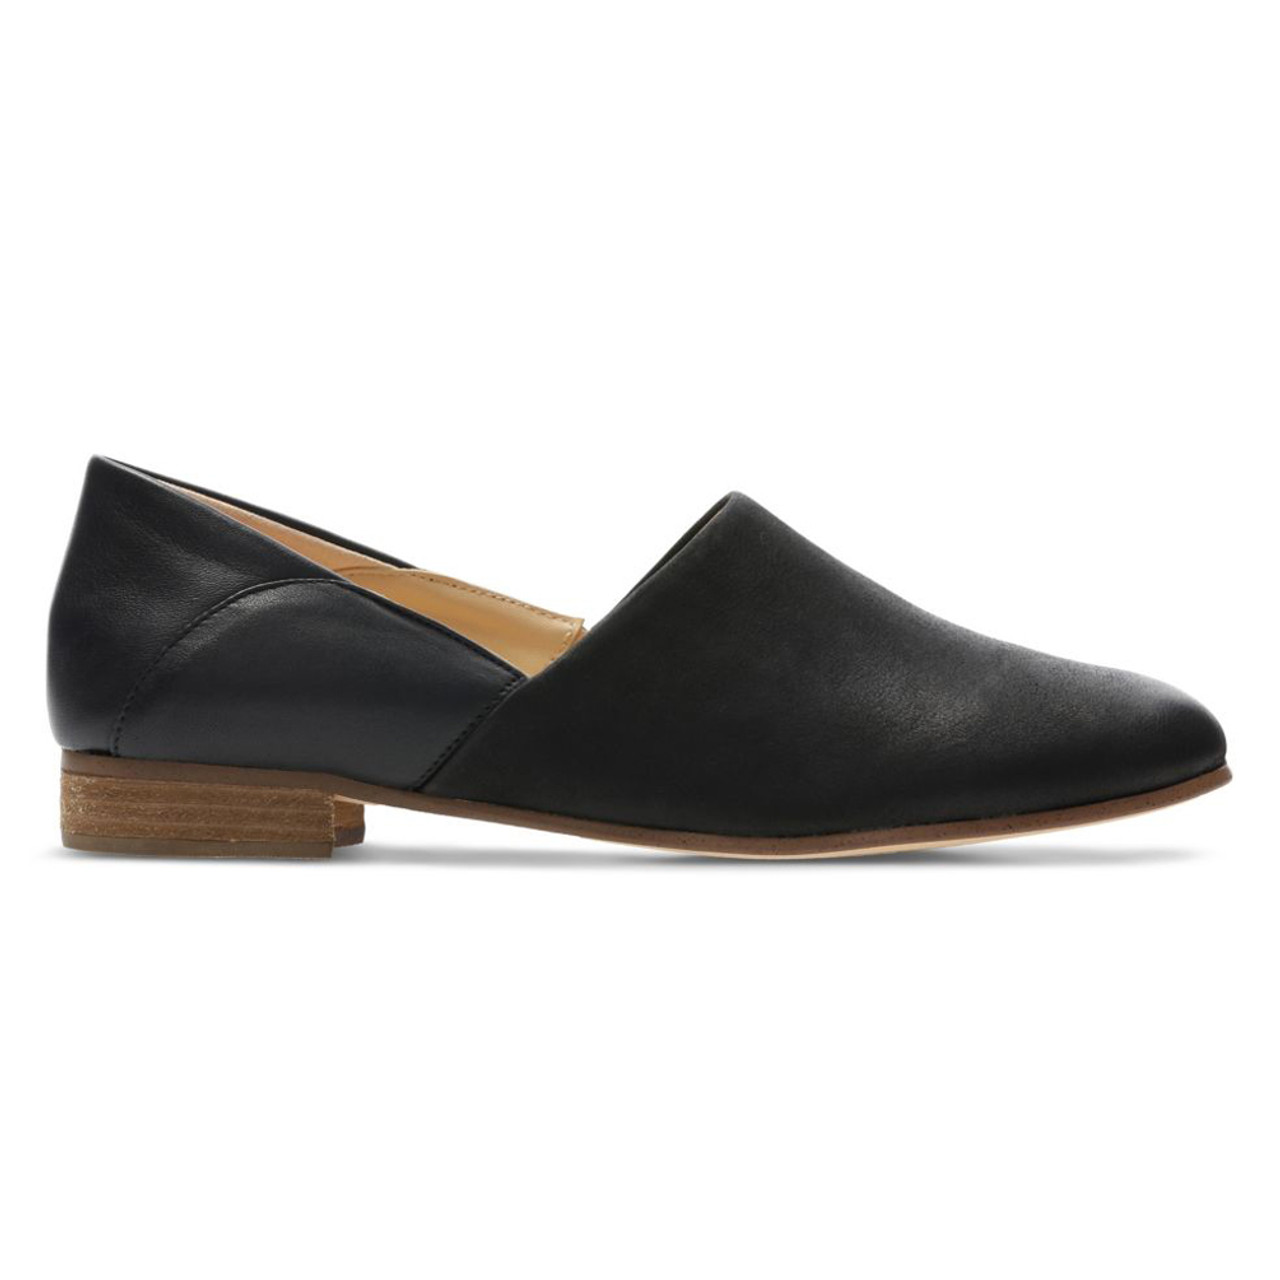 clarks womens pure tone loafer